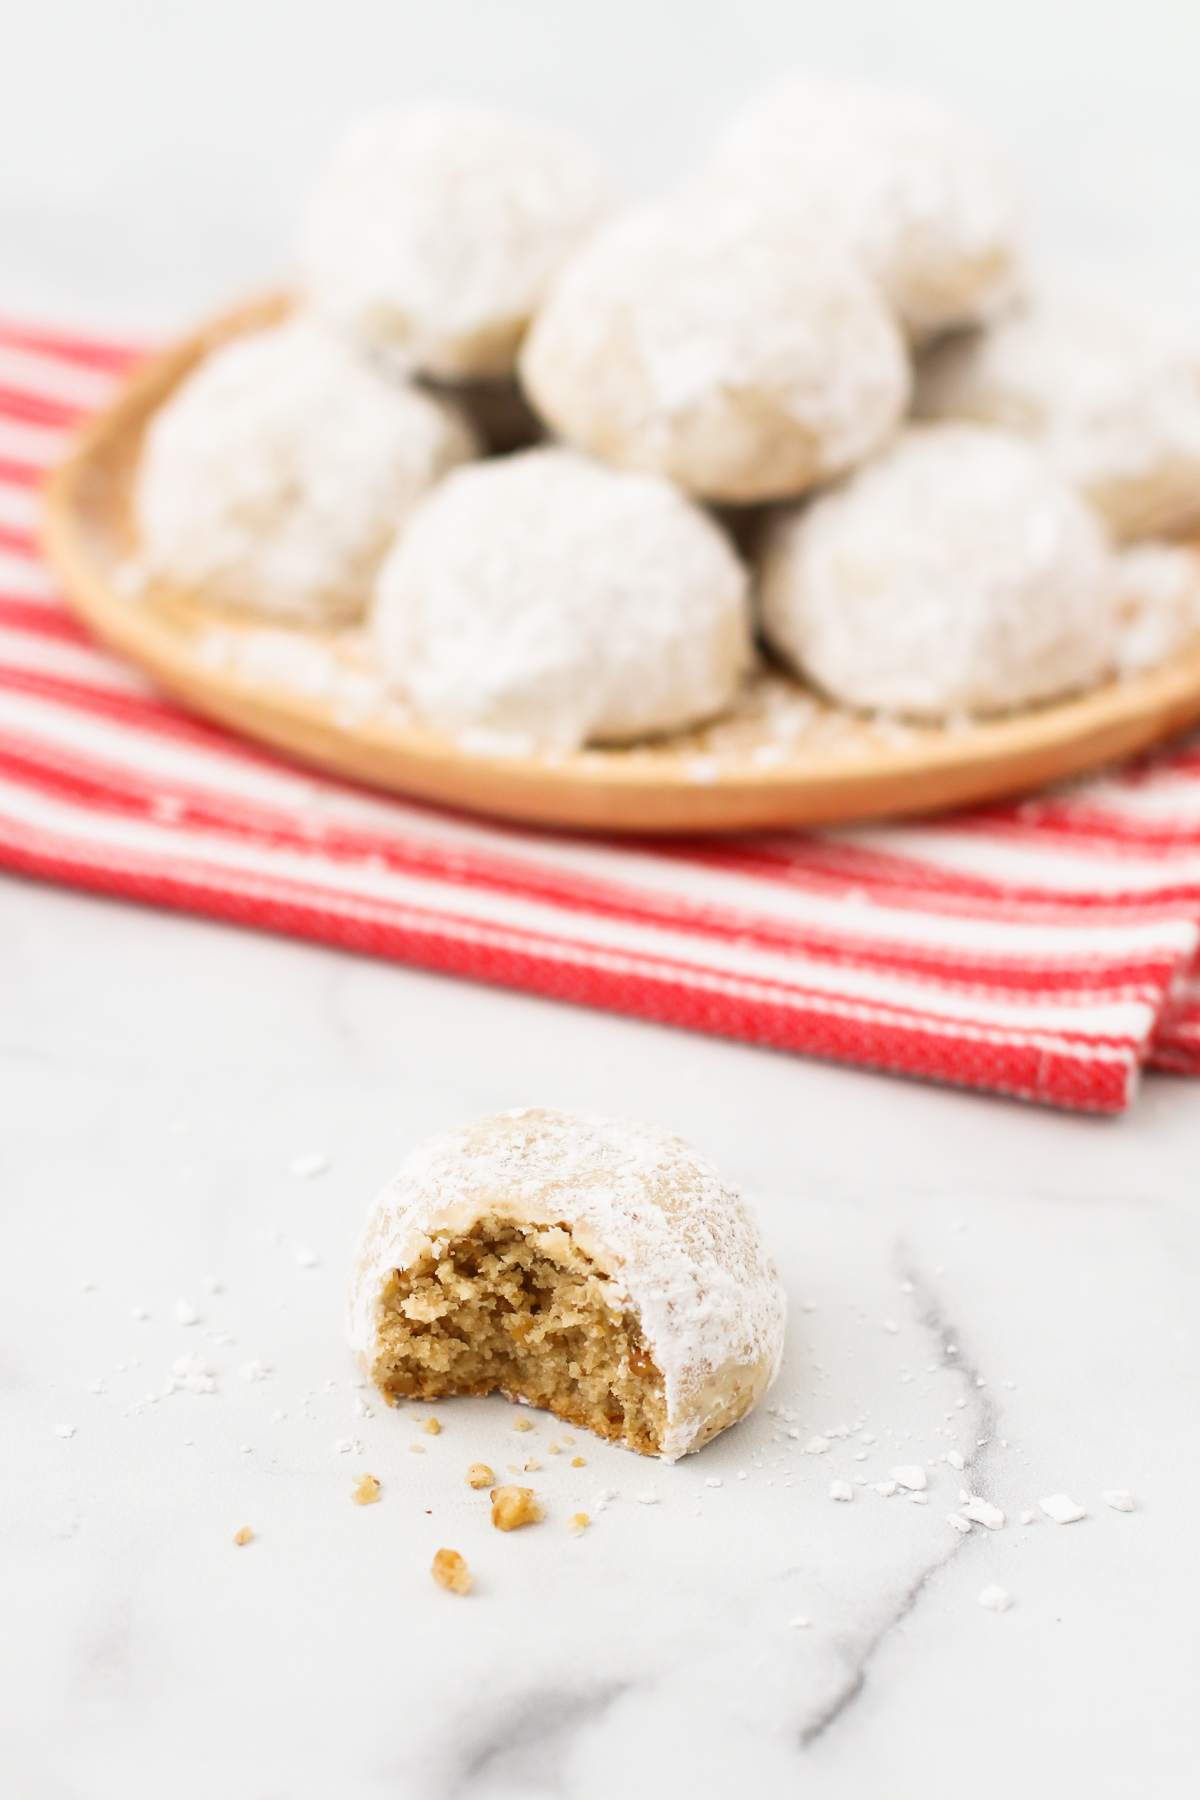 A simple holiday cookie thats made with toasted walnuts and rolled in powdered sugar. Whats not to love about these gluten free vegan snowball cookies?